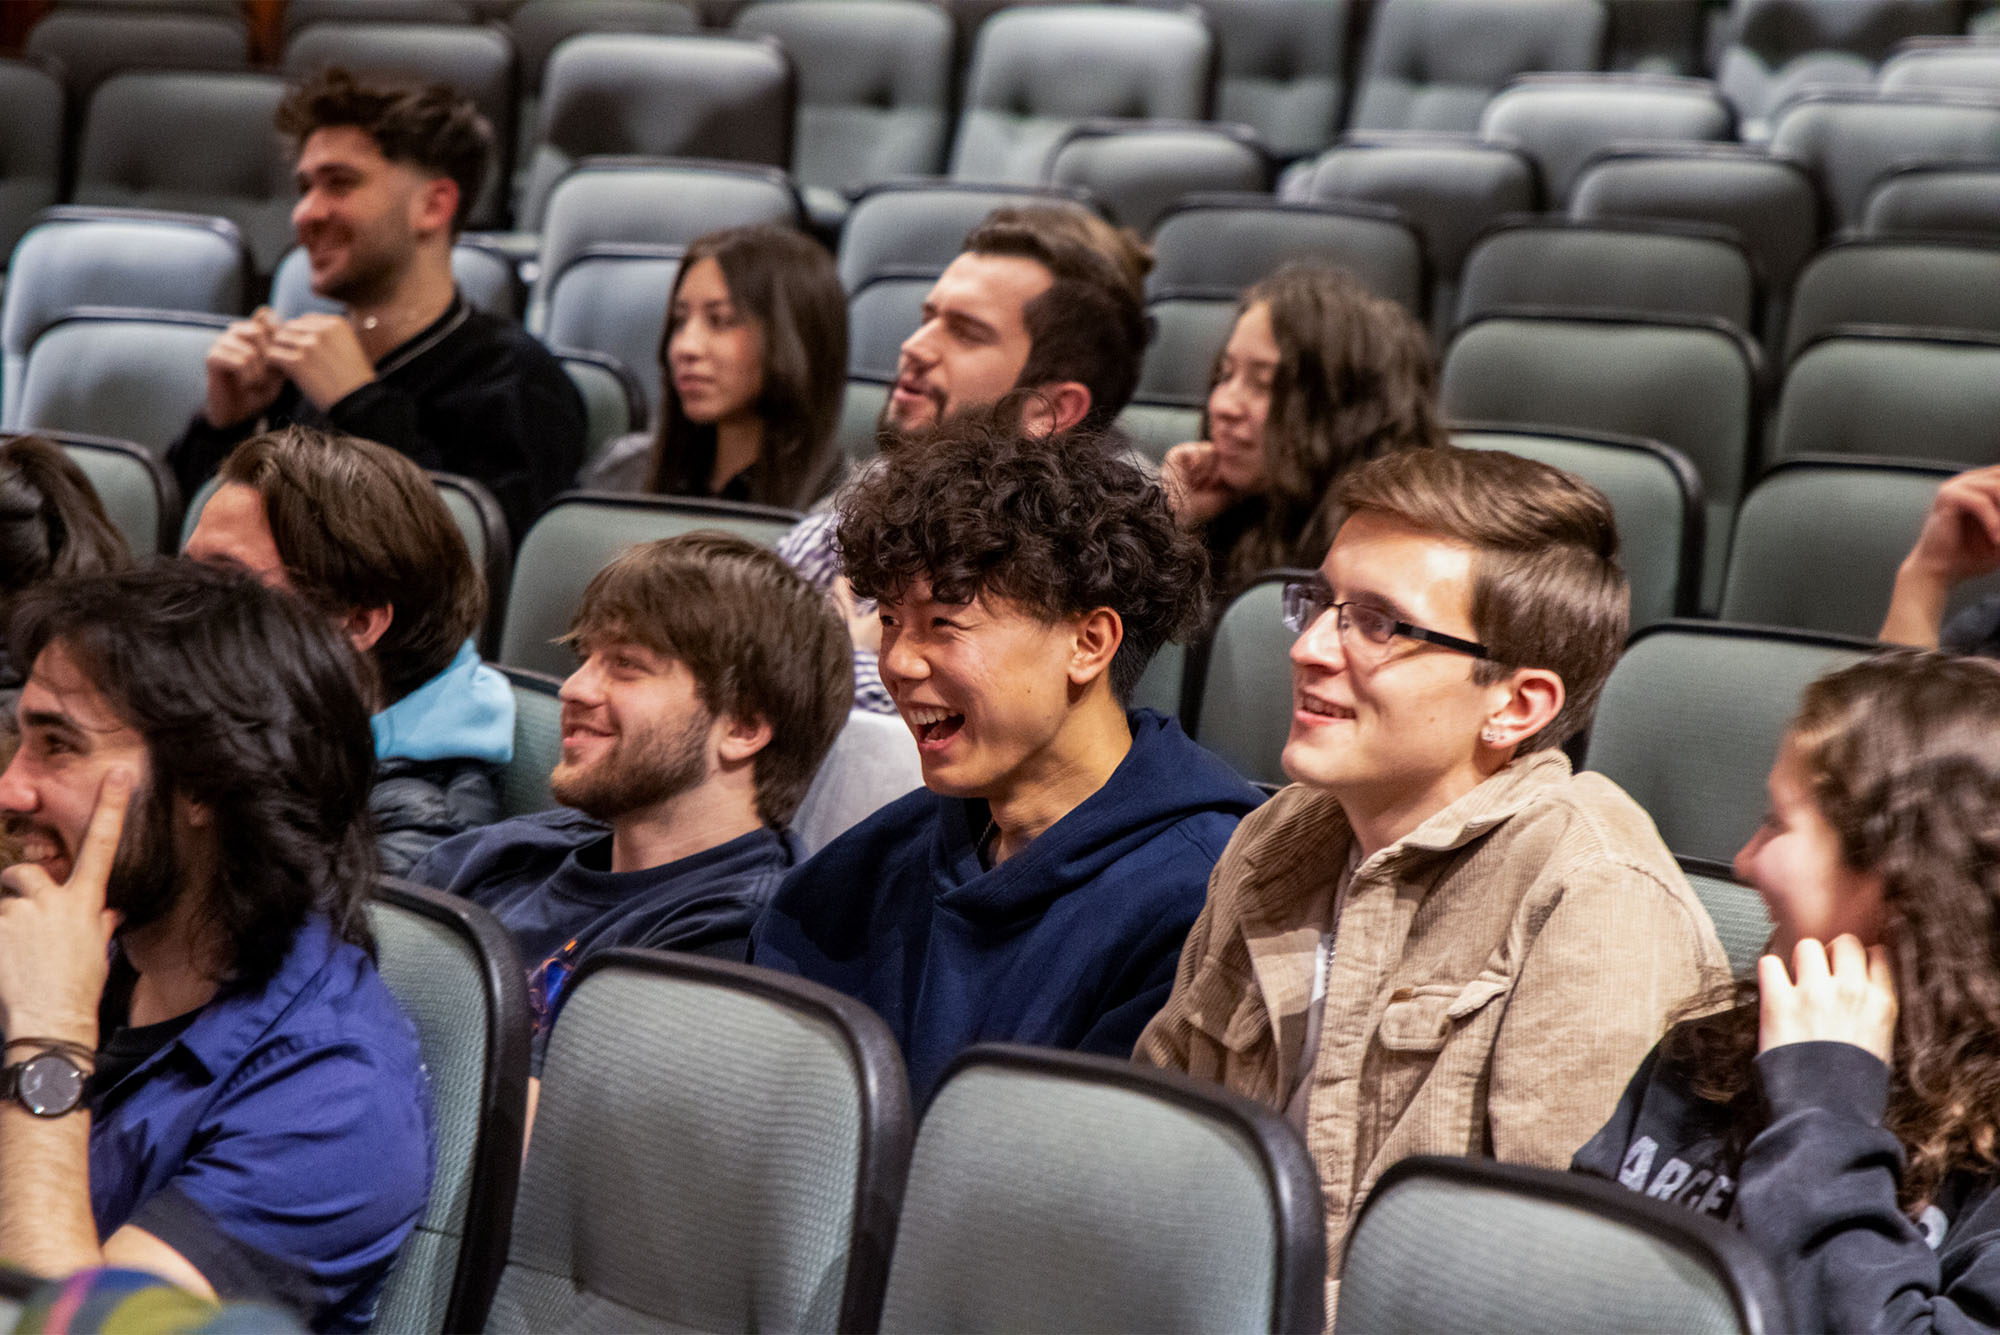 Photo: A small crowd attends a recent comedy show on BU's campus